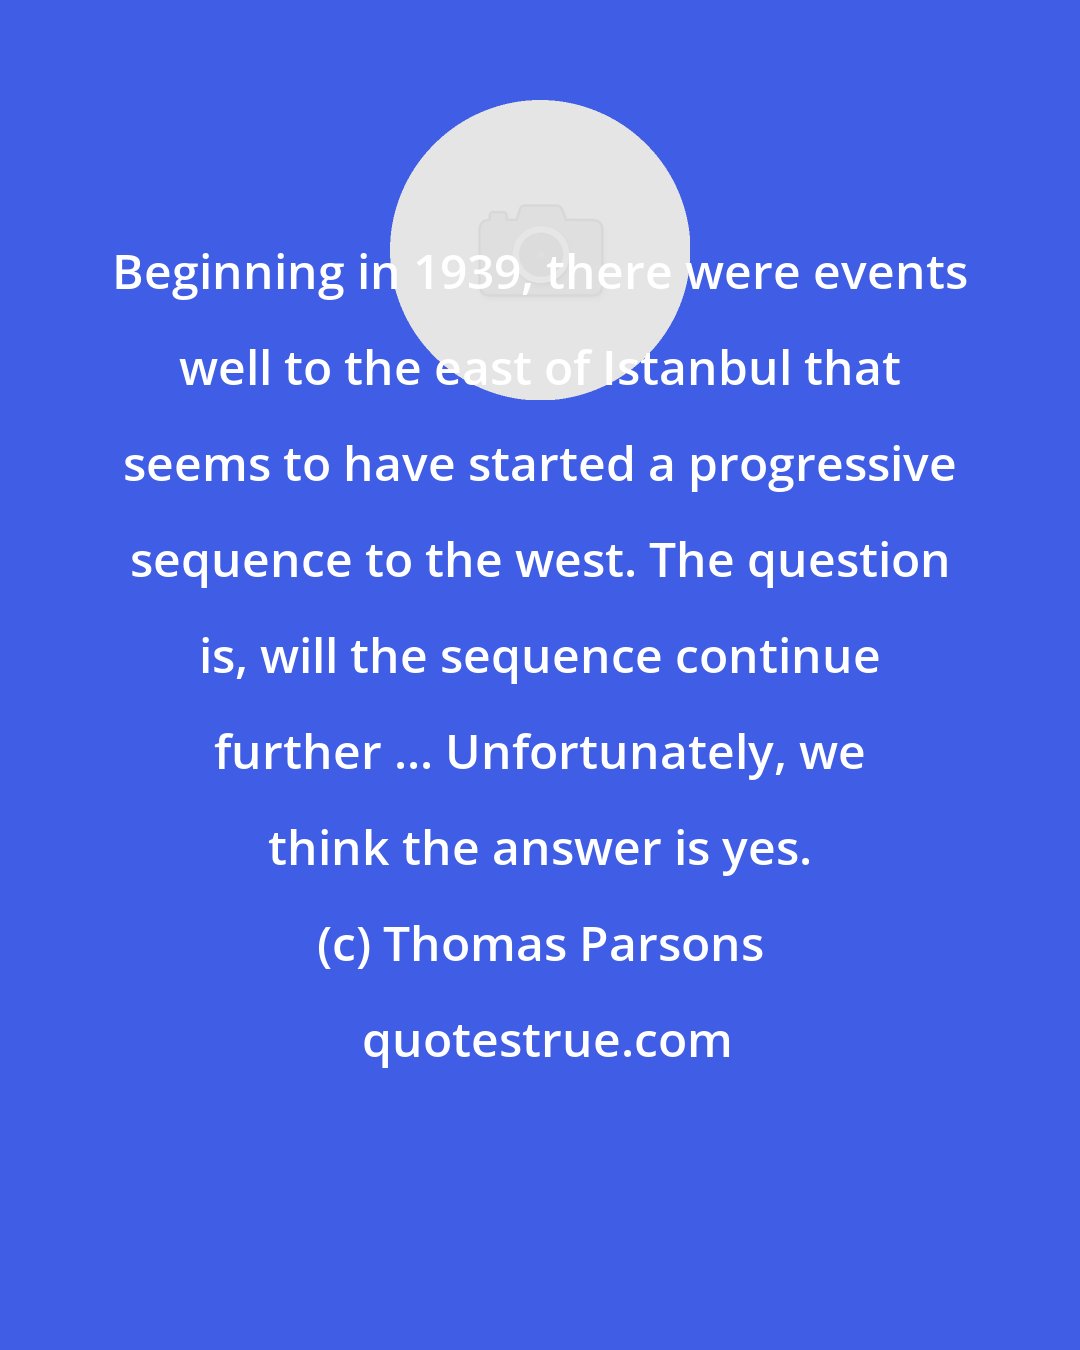 Thomas Parsons: Beginning in 1939, there were events well to the east of Istanbul that seems to have started a progressive sequence to the west. The question is, will the sequence continue further ... Unfortunately, we think the answer is yes.